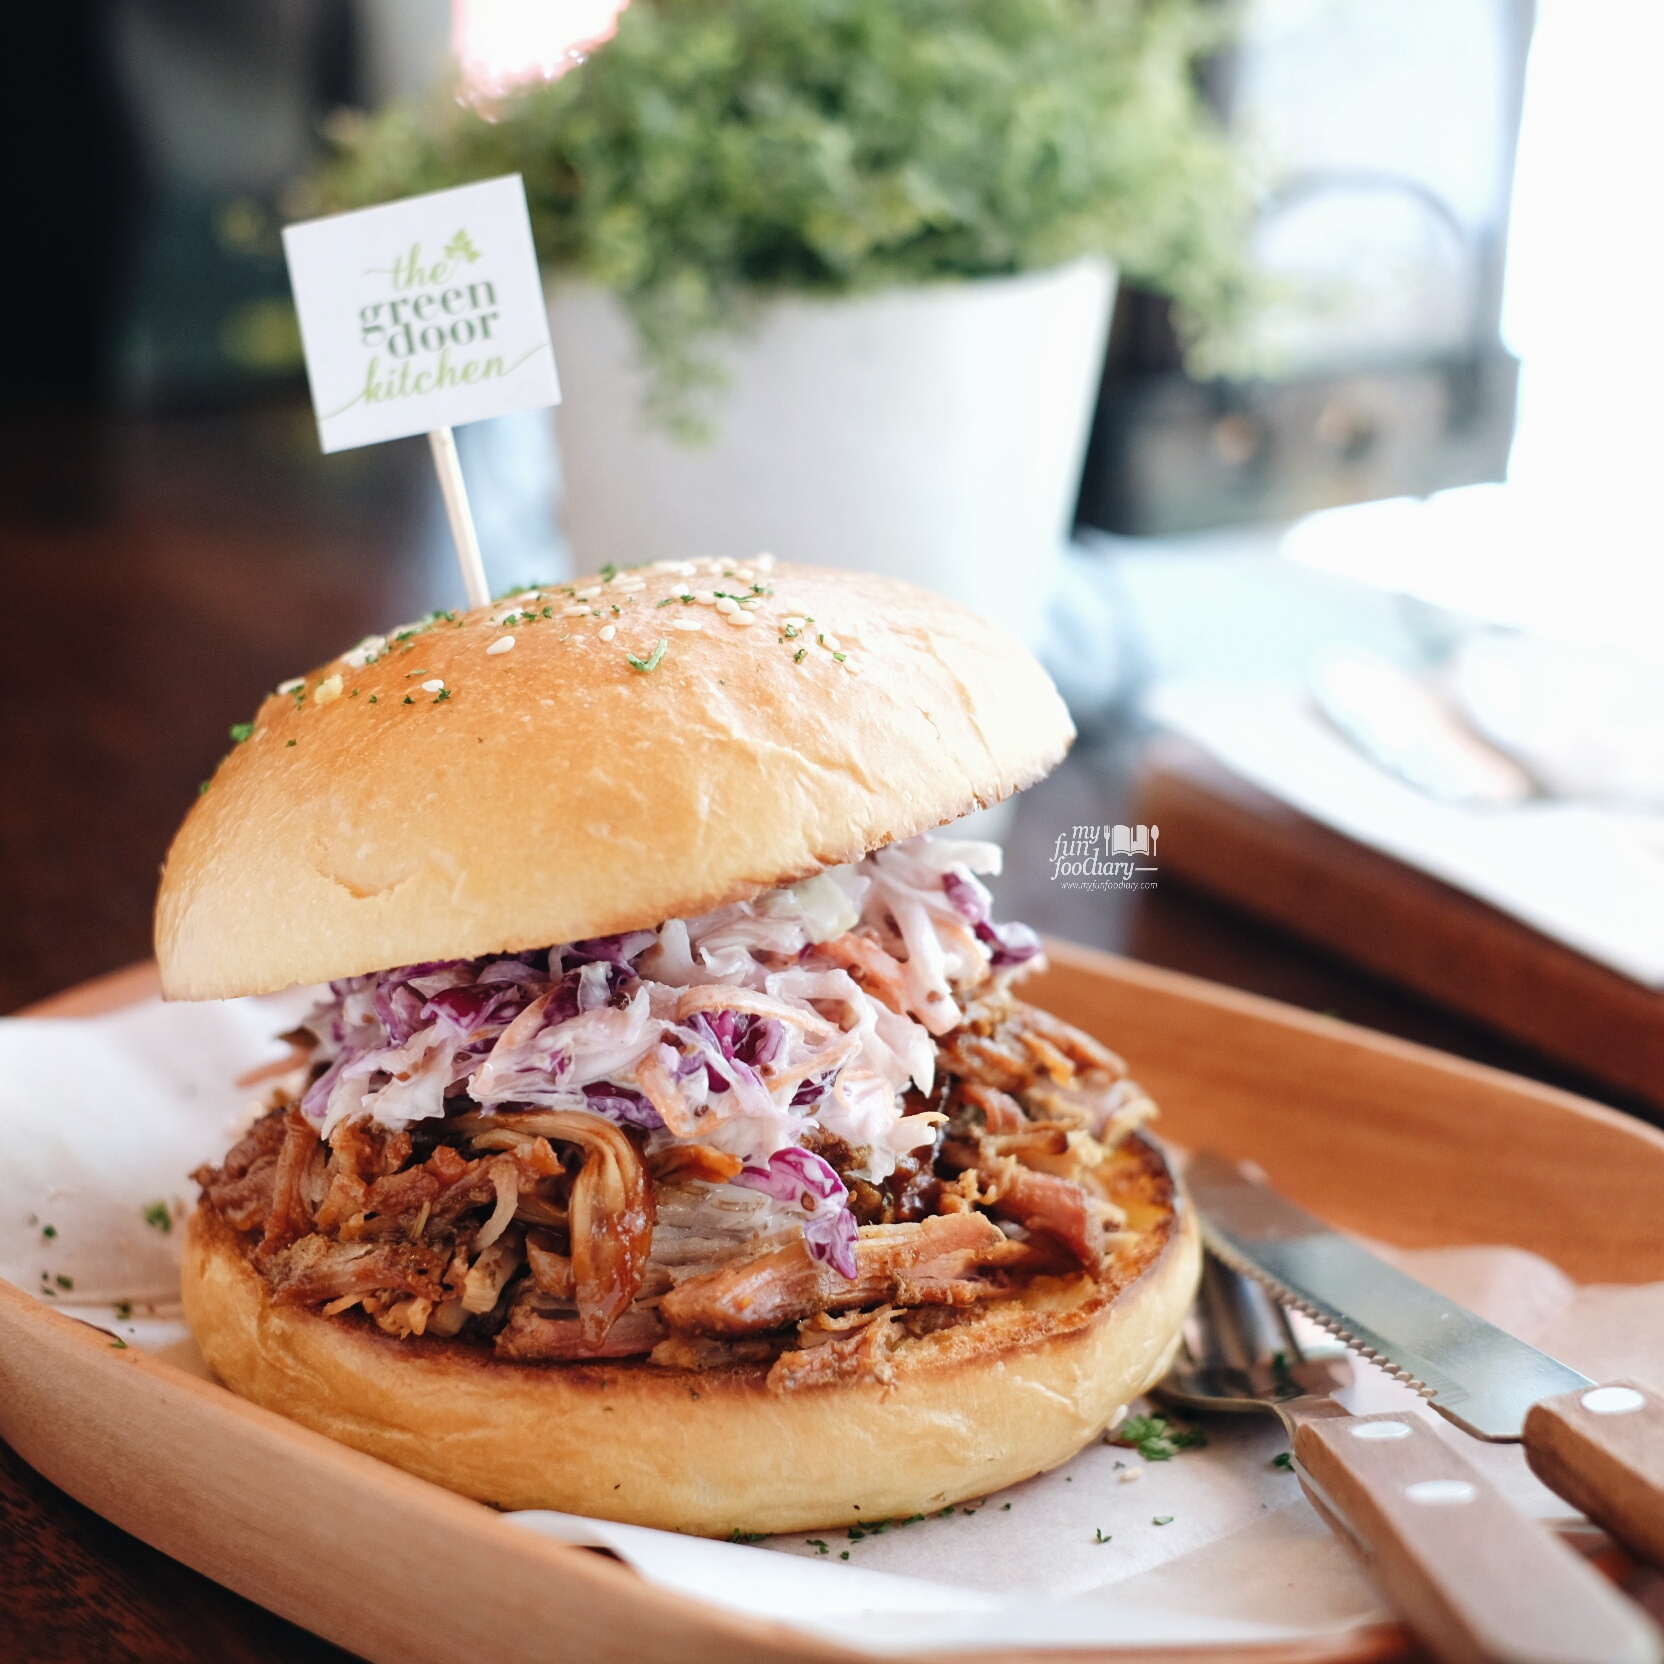 Pulled Pork Sandwich at The Green Door Kitchen by Myfunfoodiary